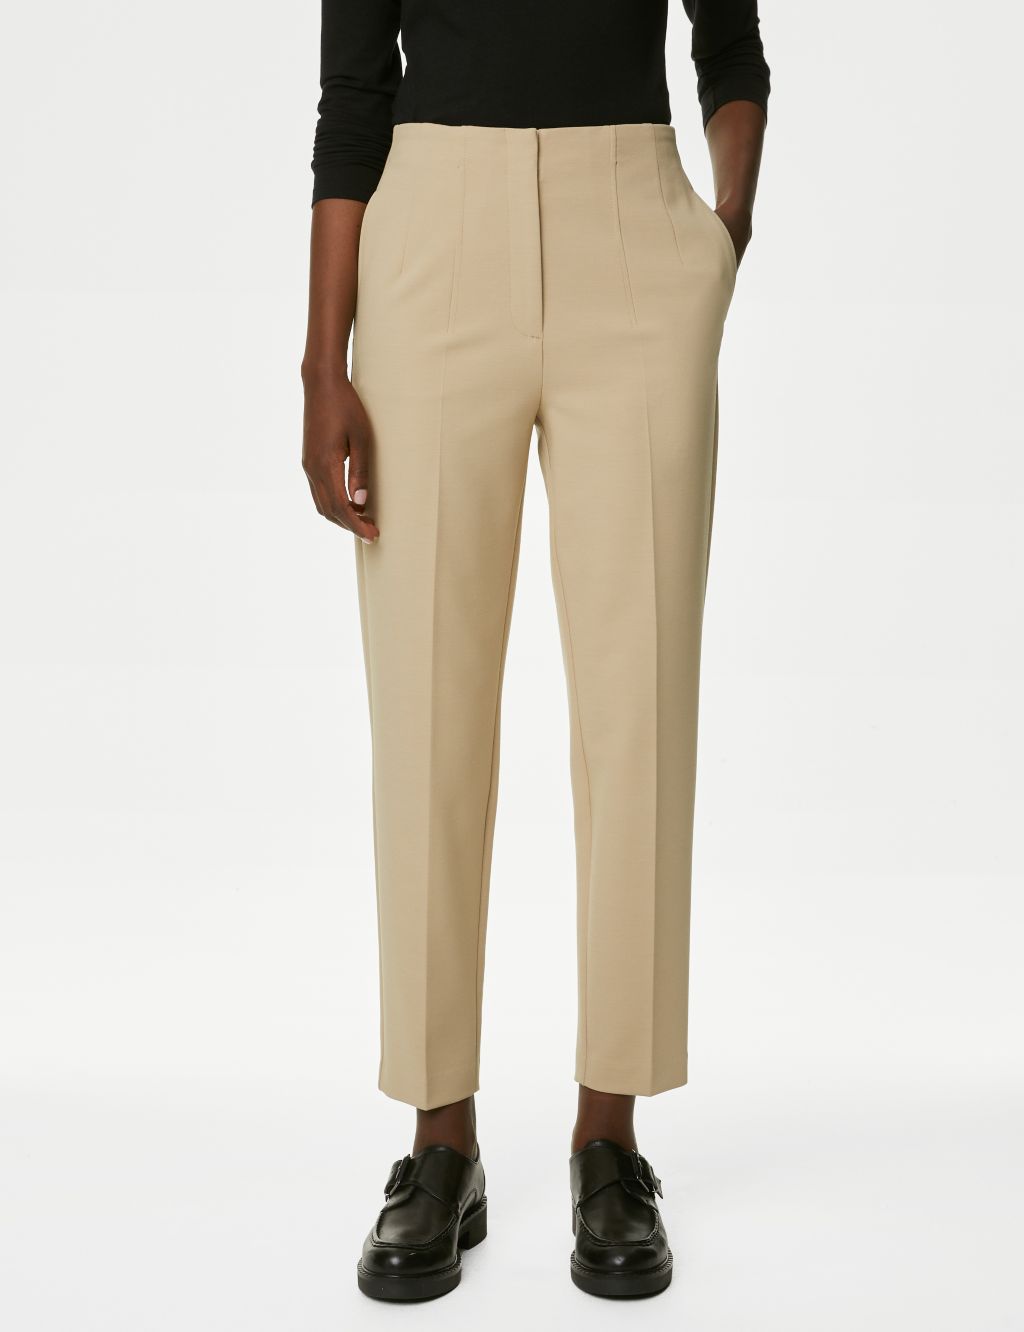 Tapered Ankle Grazer Trousers image 2